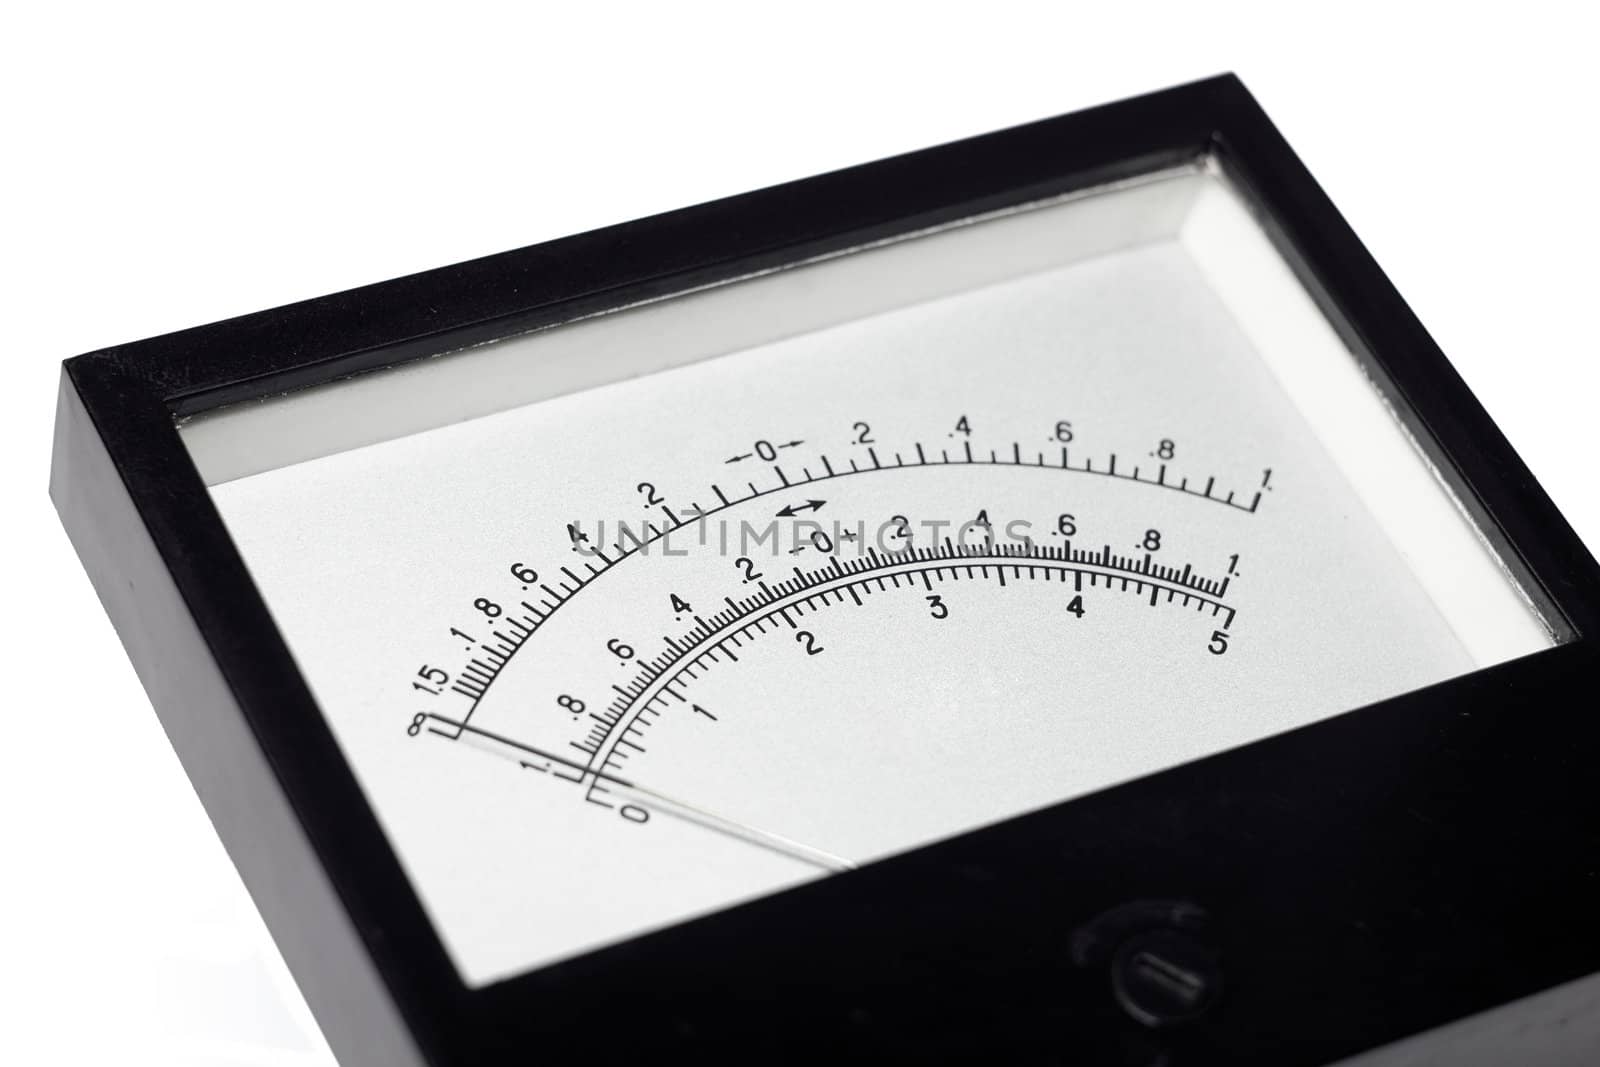 The image of the measuring device isolated, on a white background